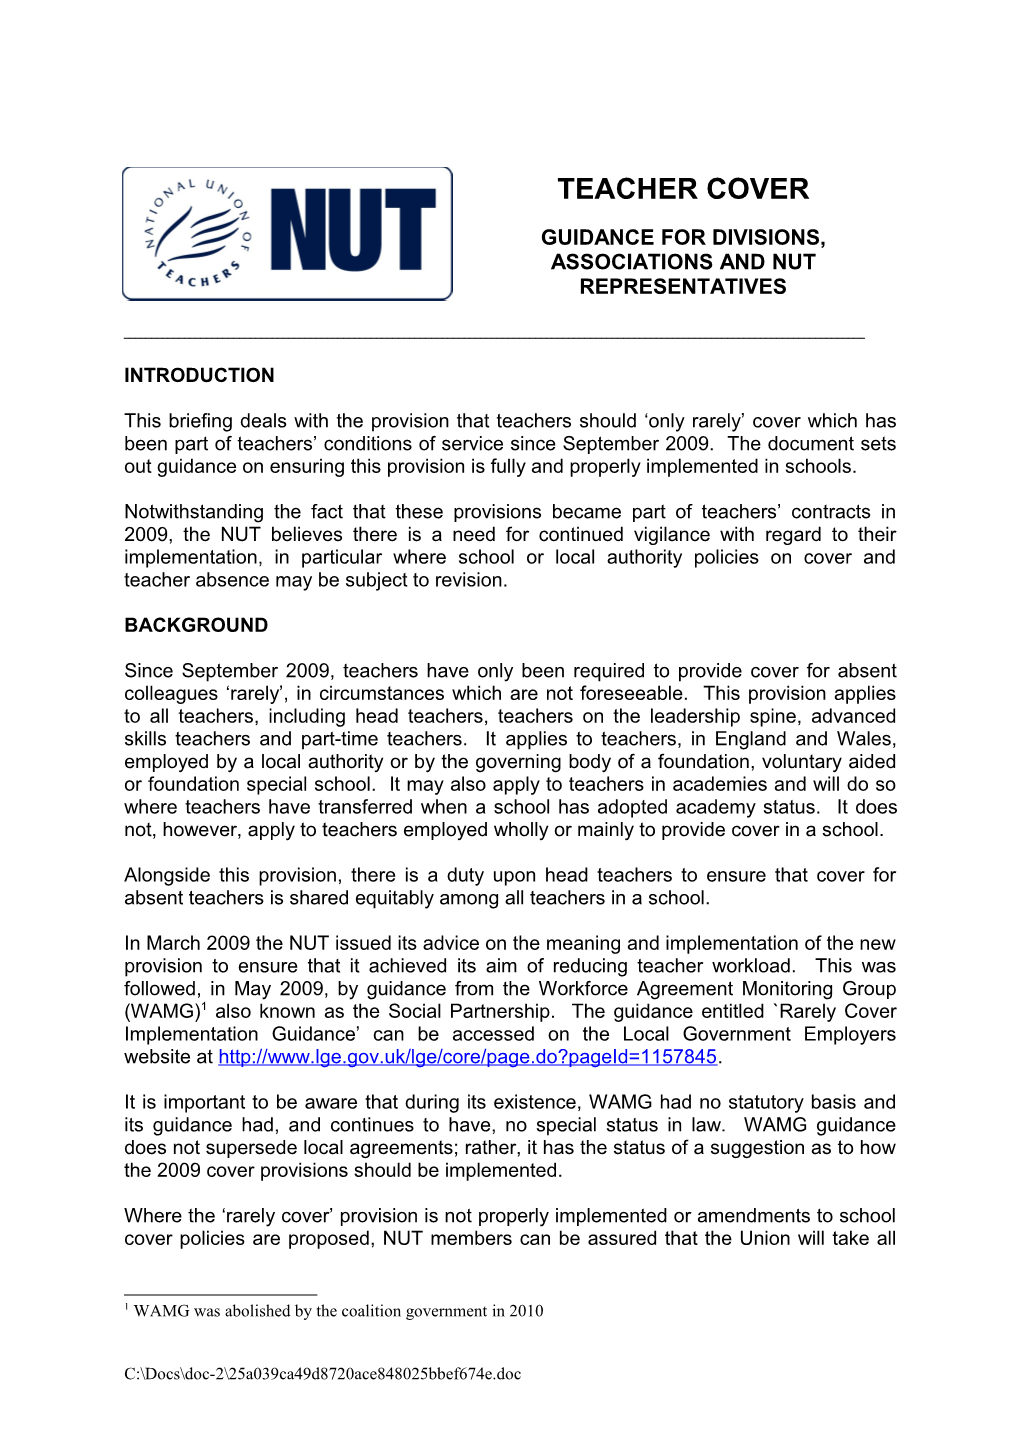 Guidance for Divisions, Associations and Nut Representatives